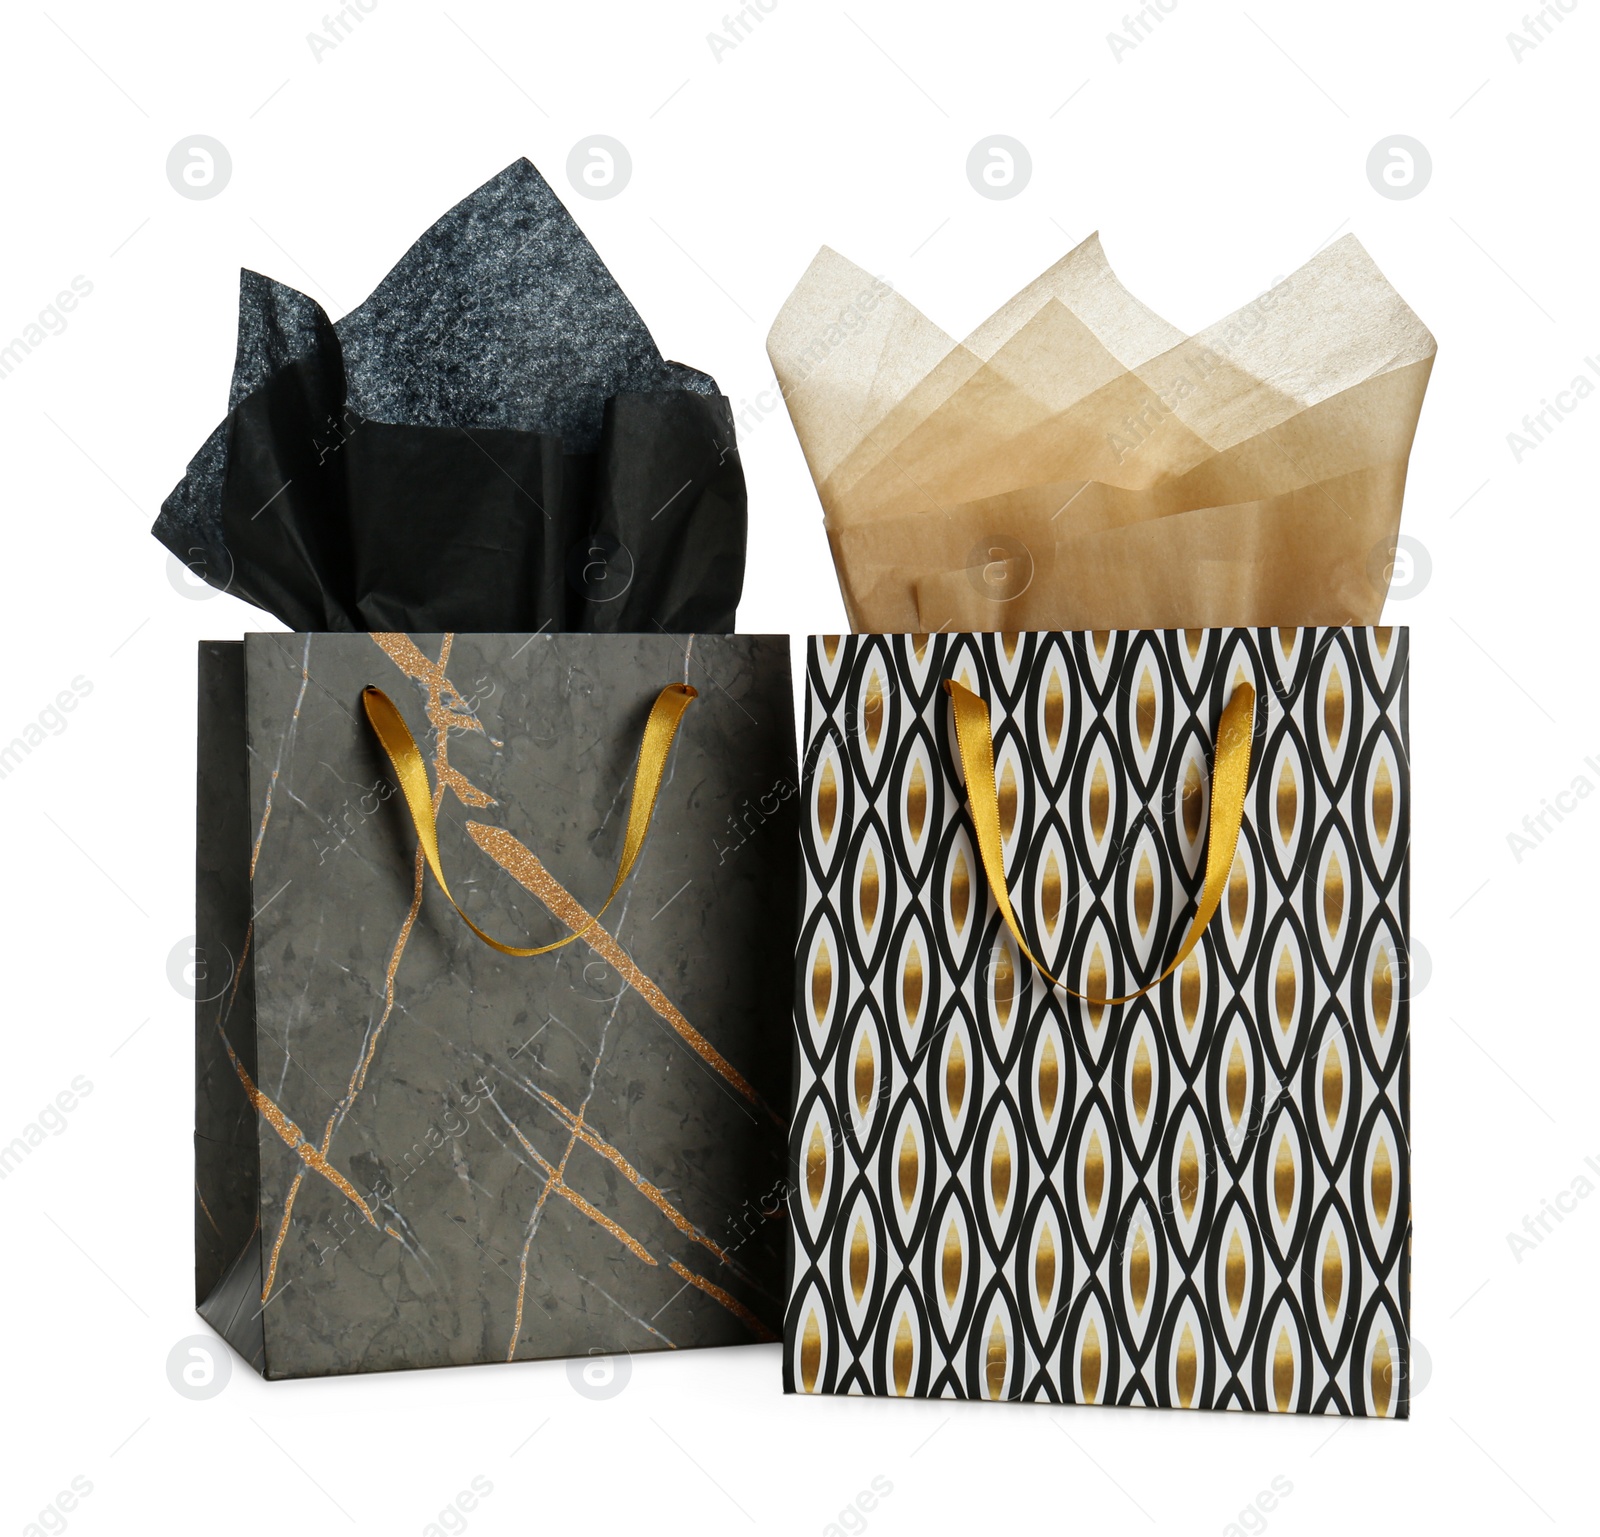 Photo of Gift bags with paper on white background